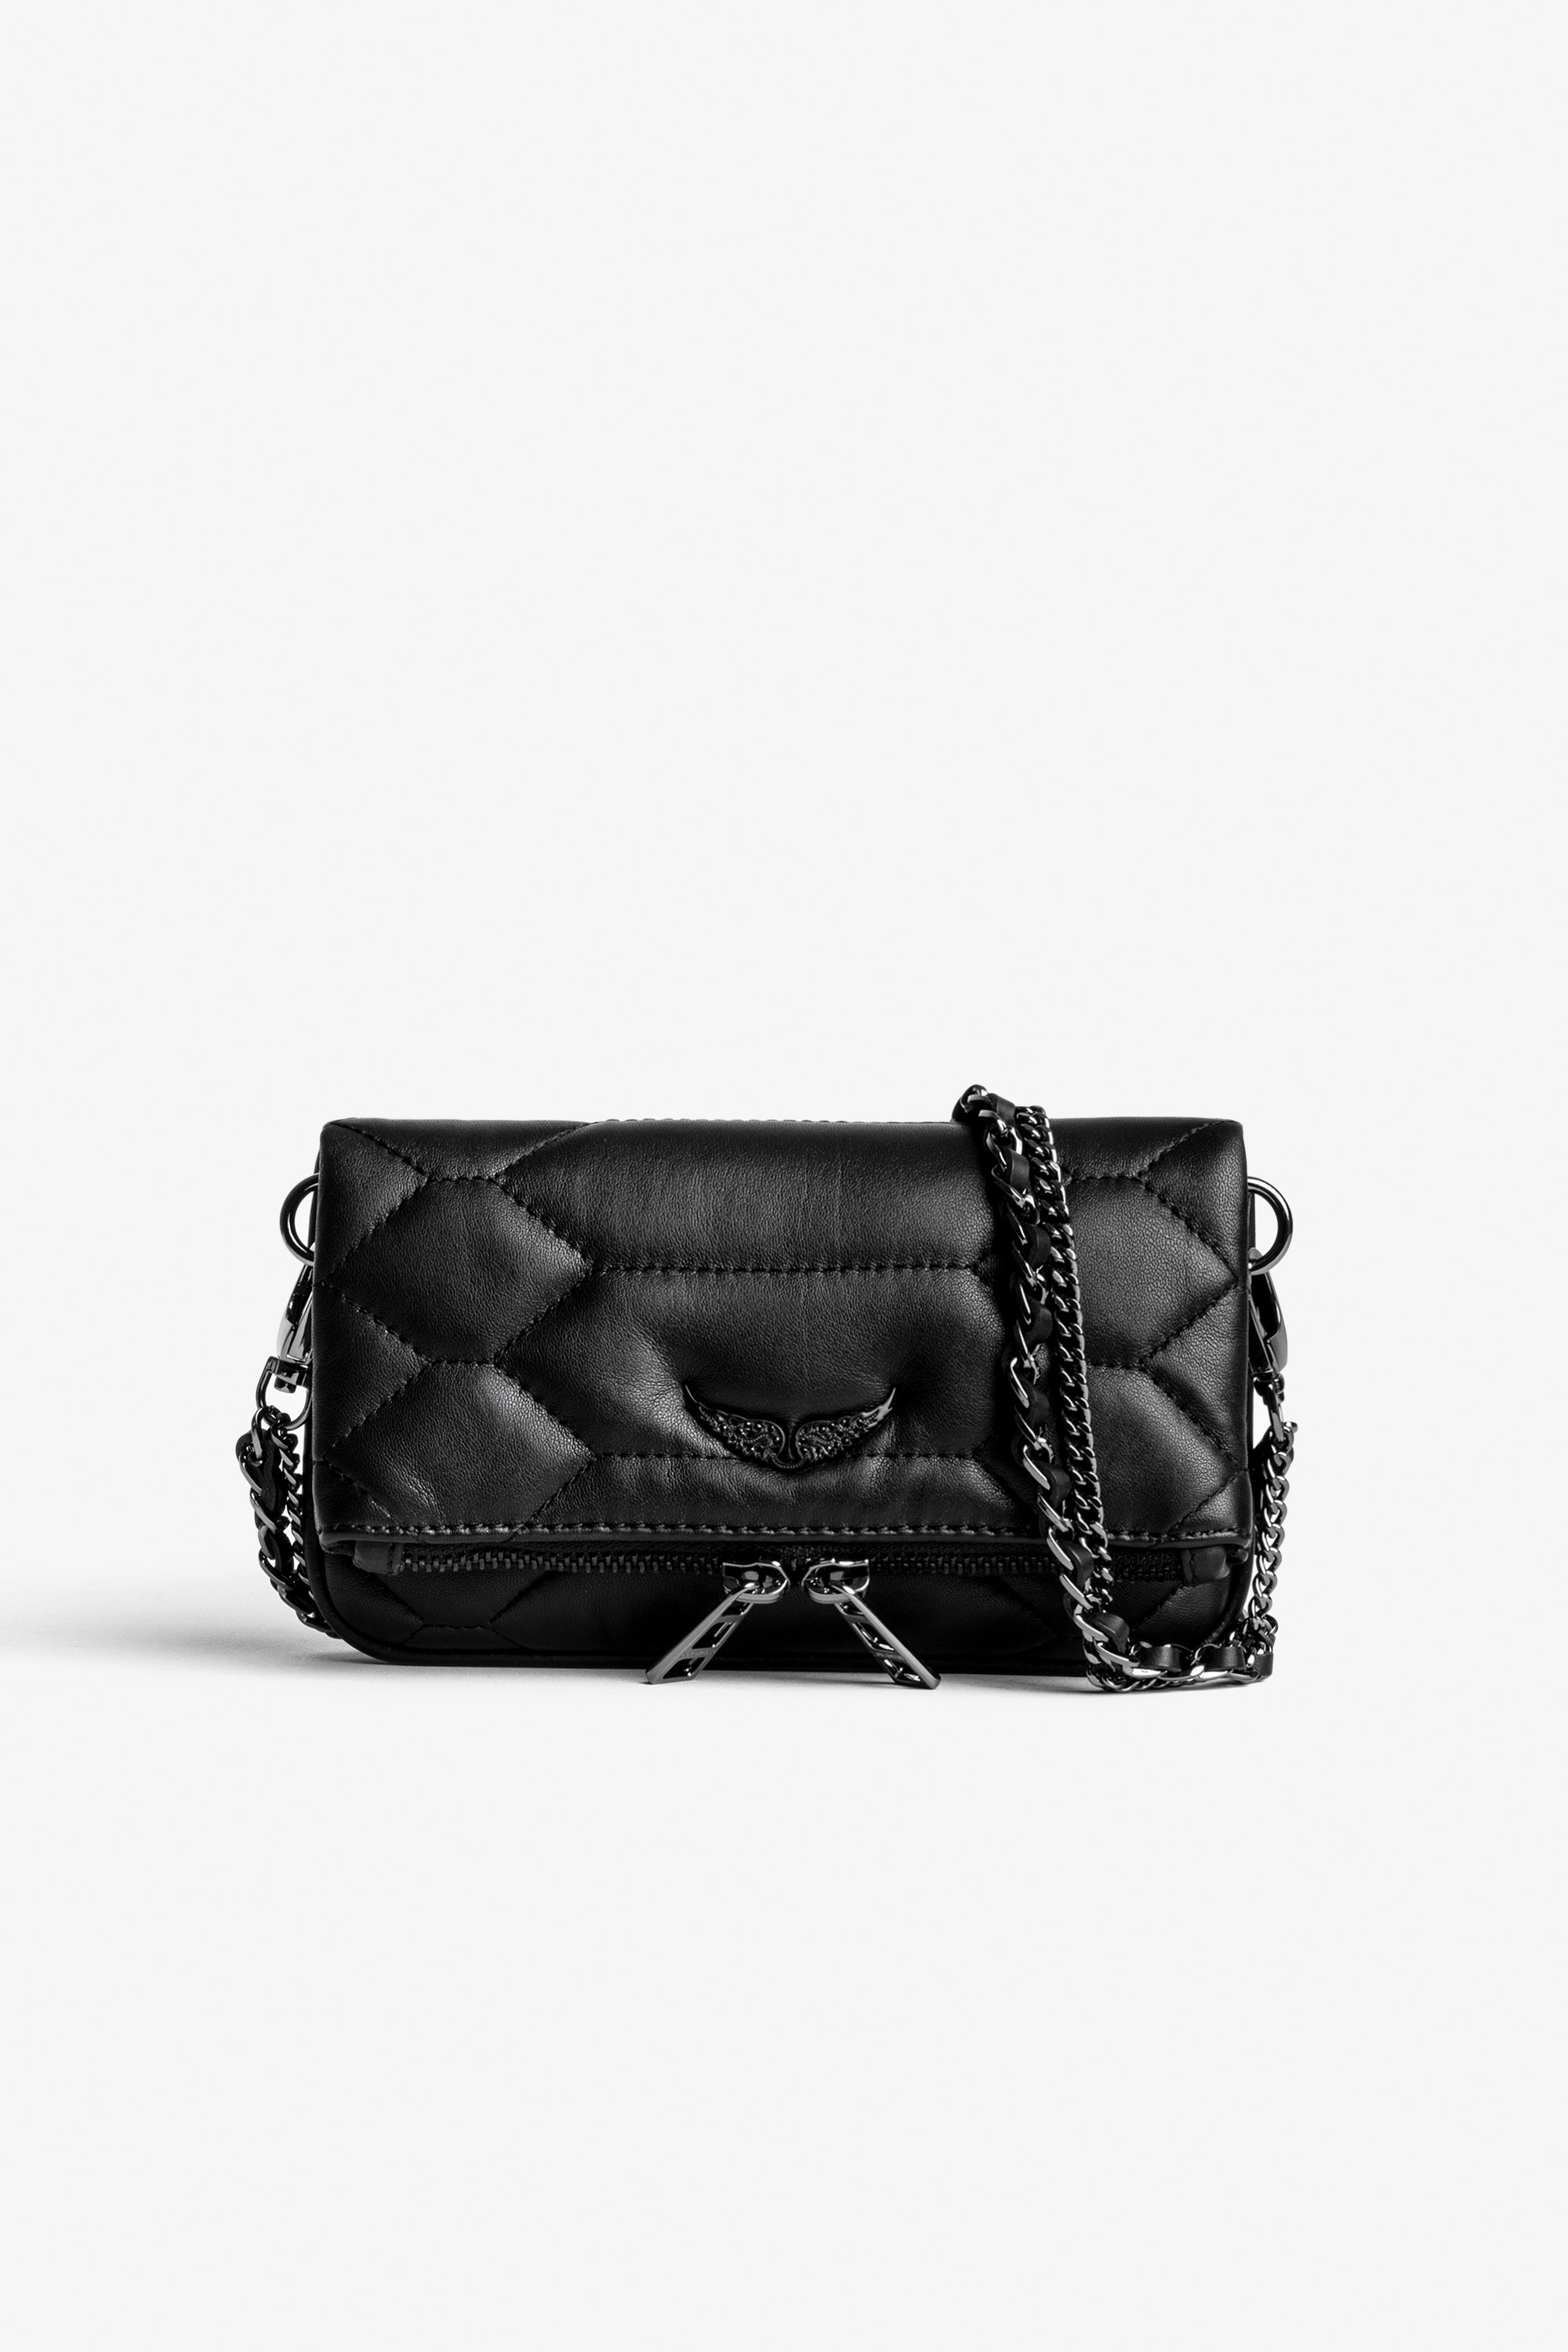 Rock Nano Quilted Leather Clutch Rock Nano Black Quilted Leather Clutch